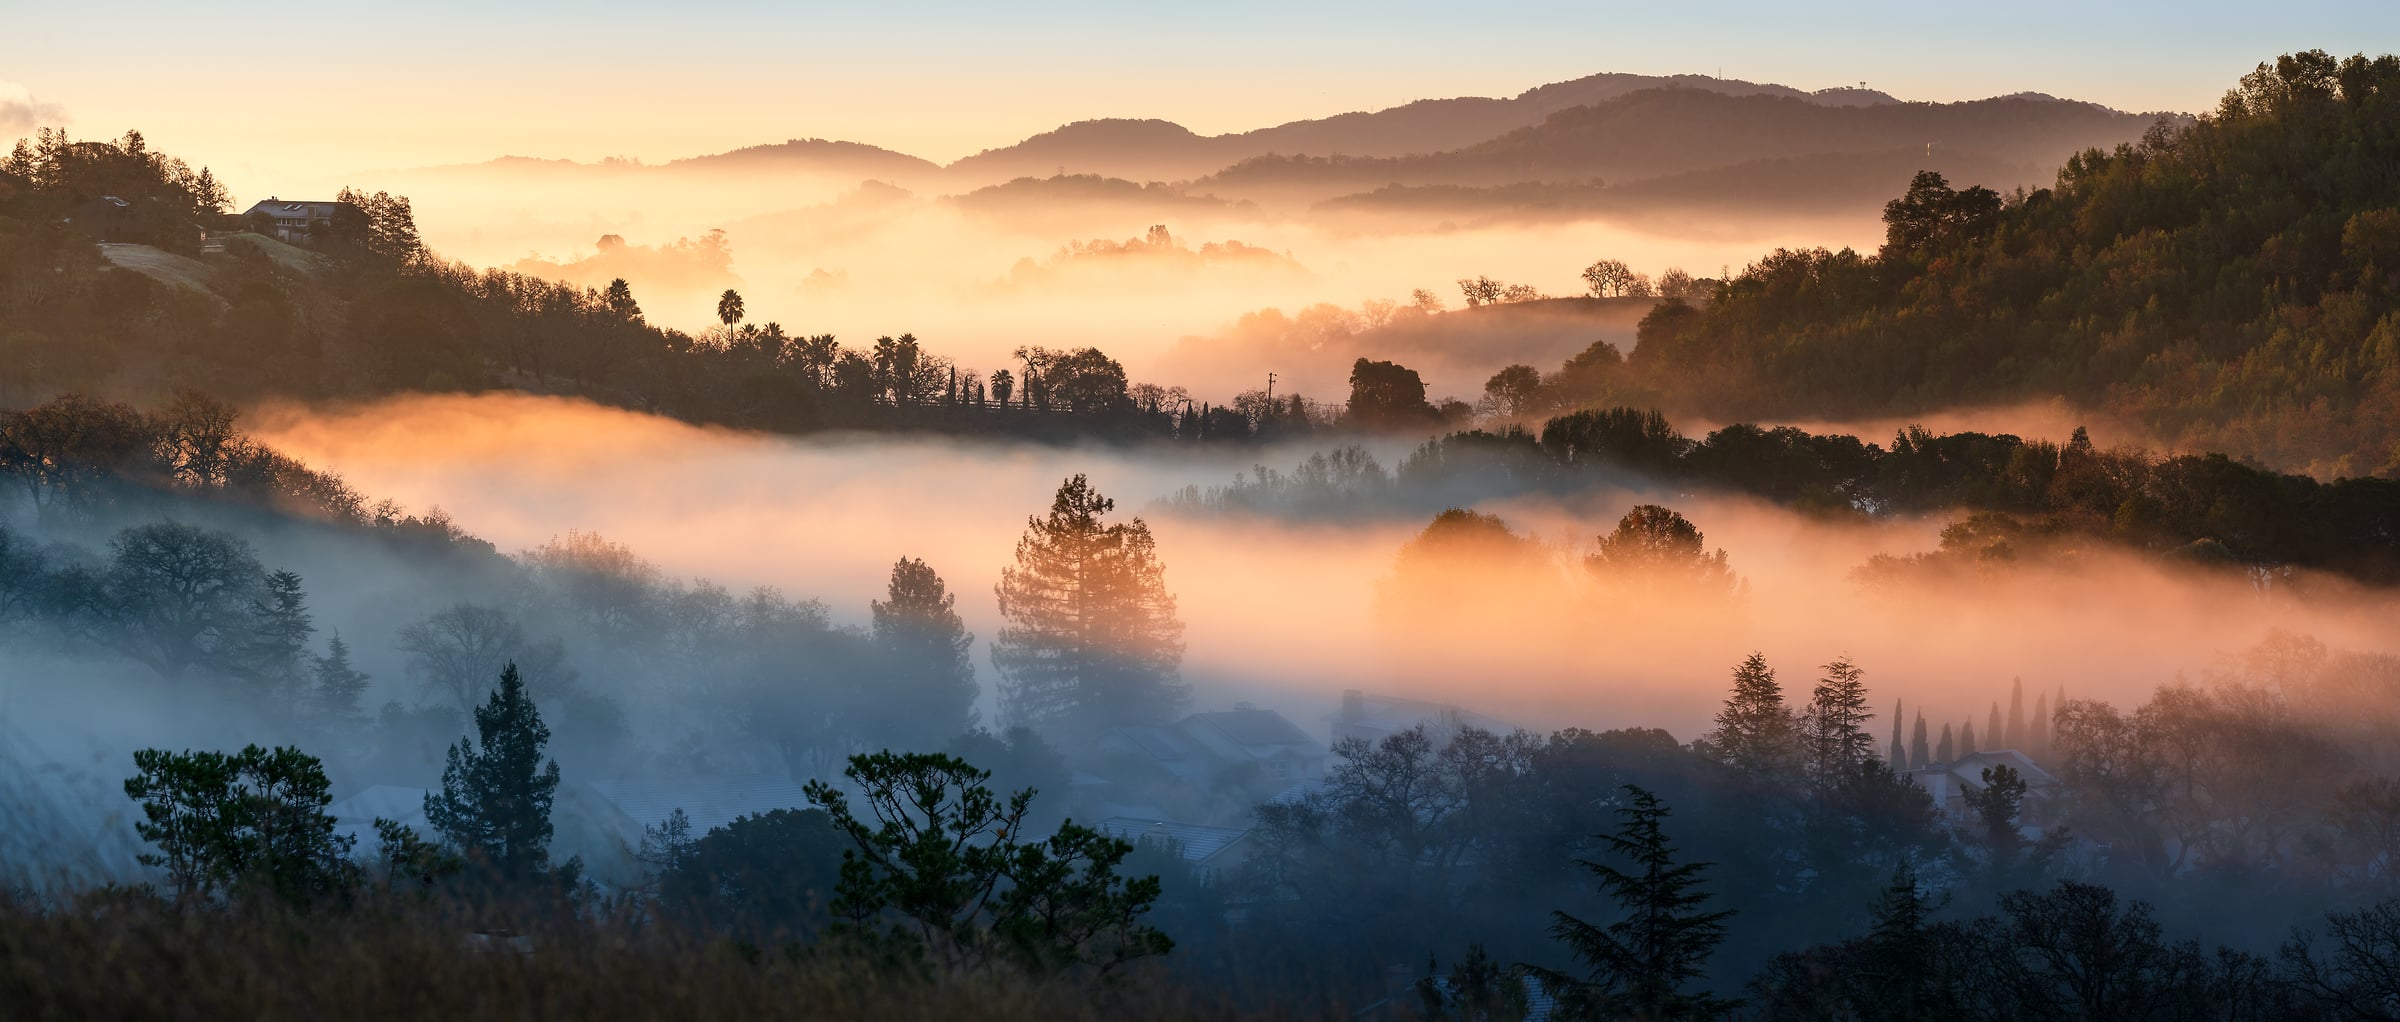 104 megapixels! A very high resolution, large-format VAST photo print of sun rays at sunrise in the morning with hills, trees, fog, and mist; landscape photograph created by Jeff Lewis in Marin County, California.